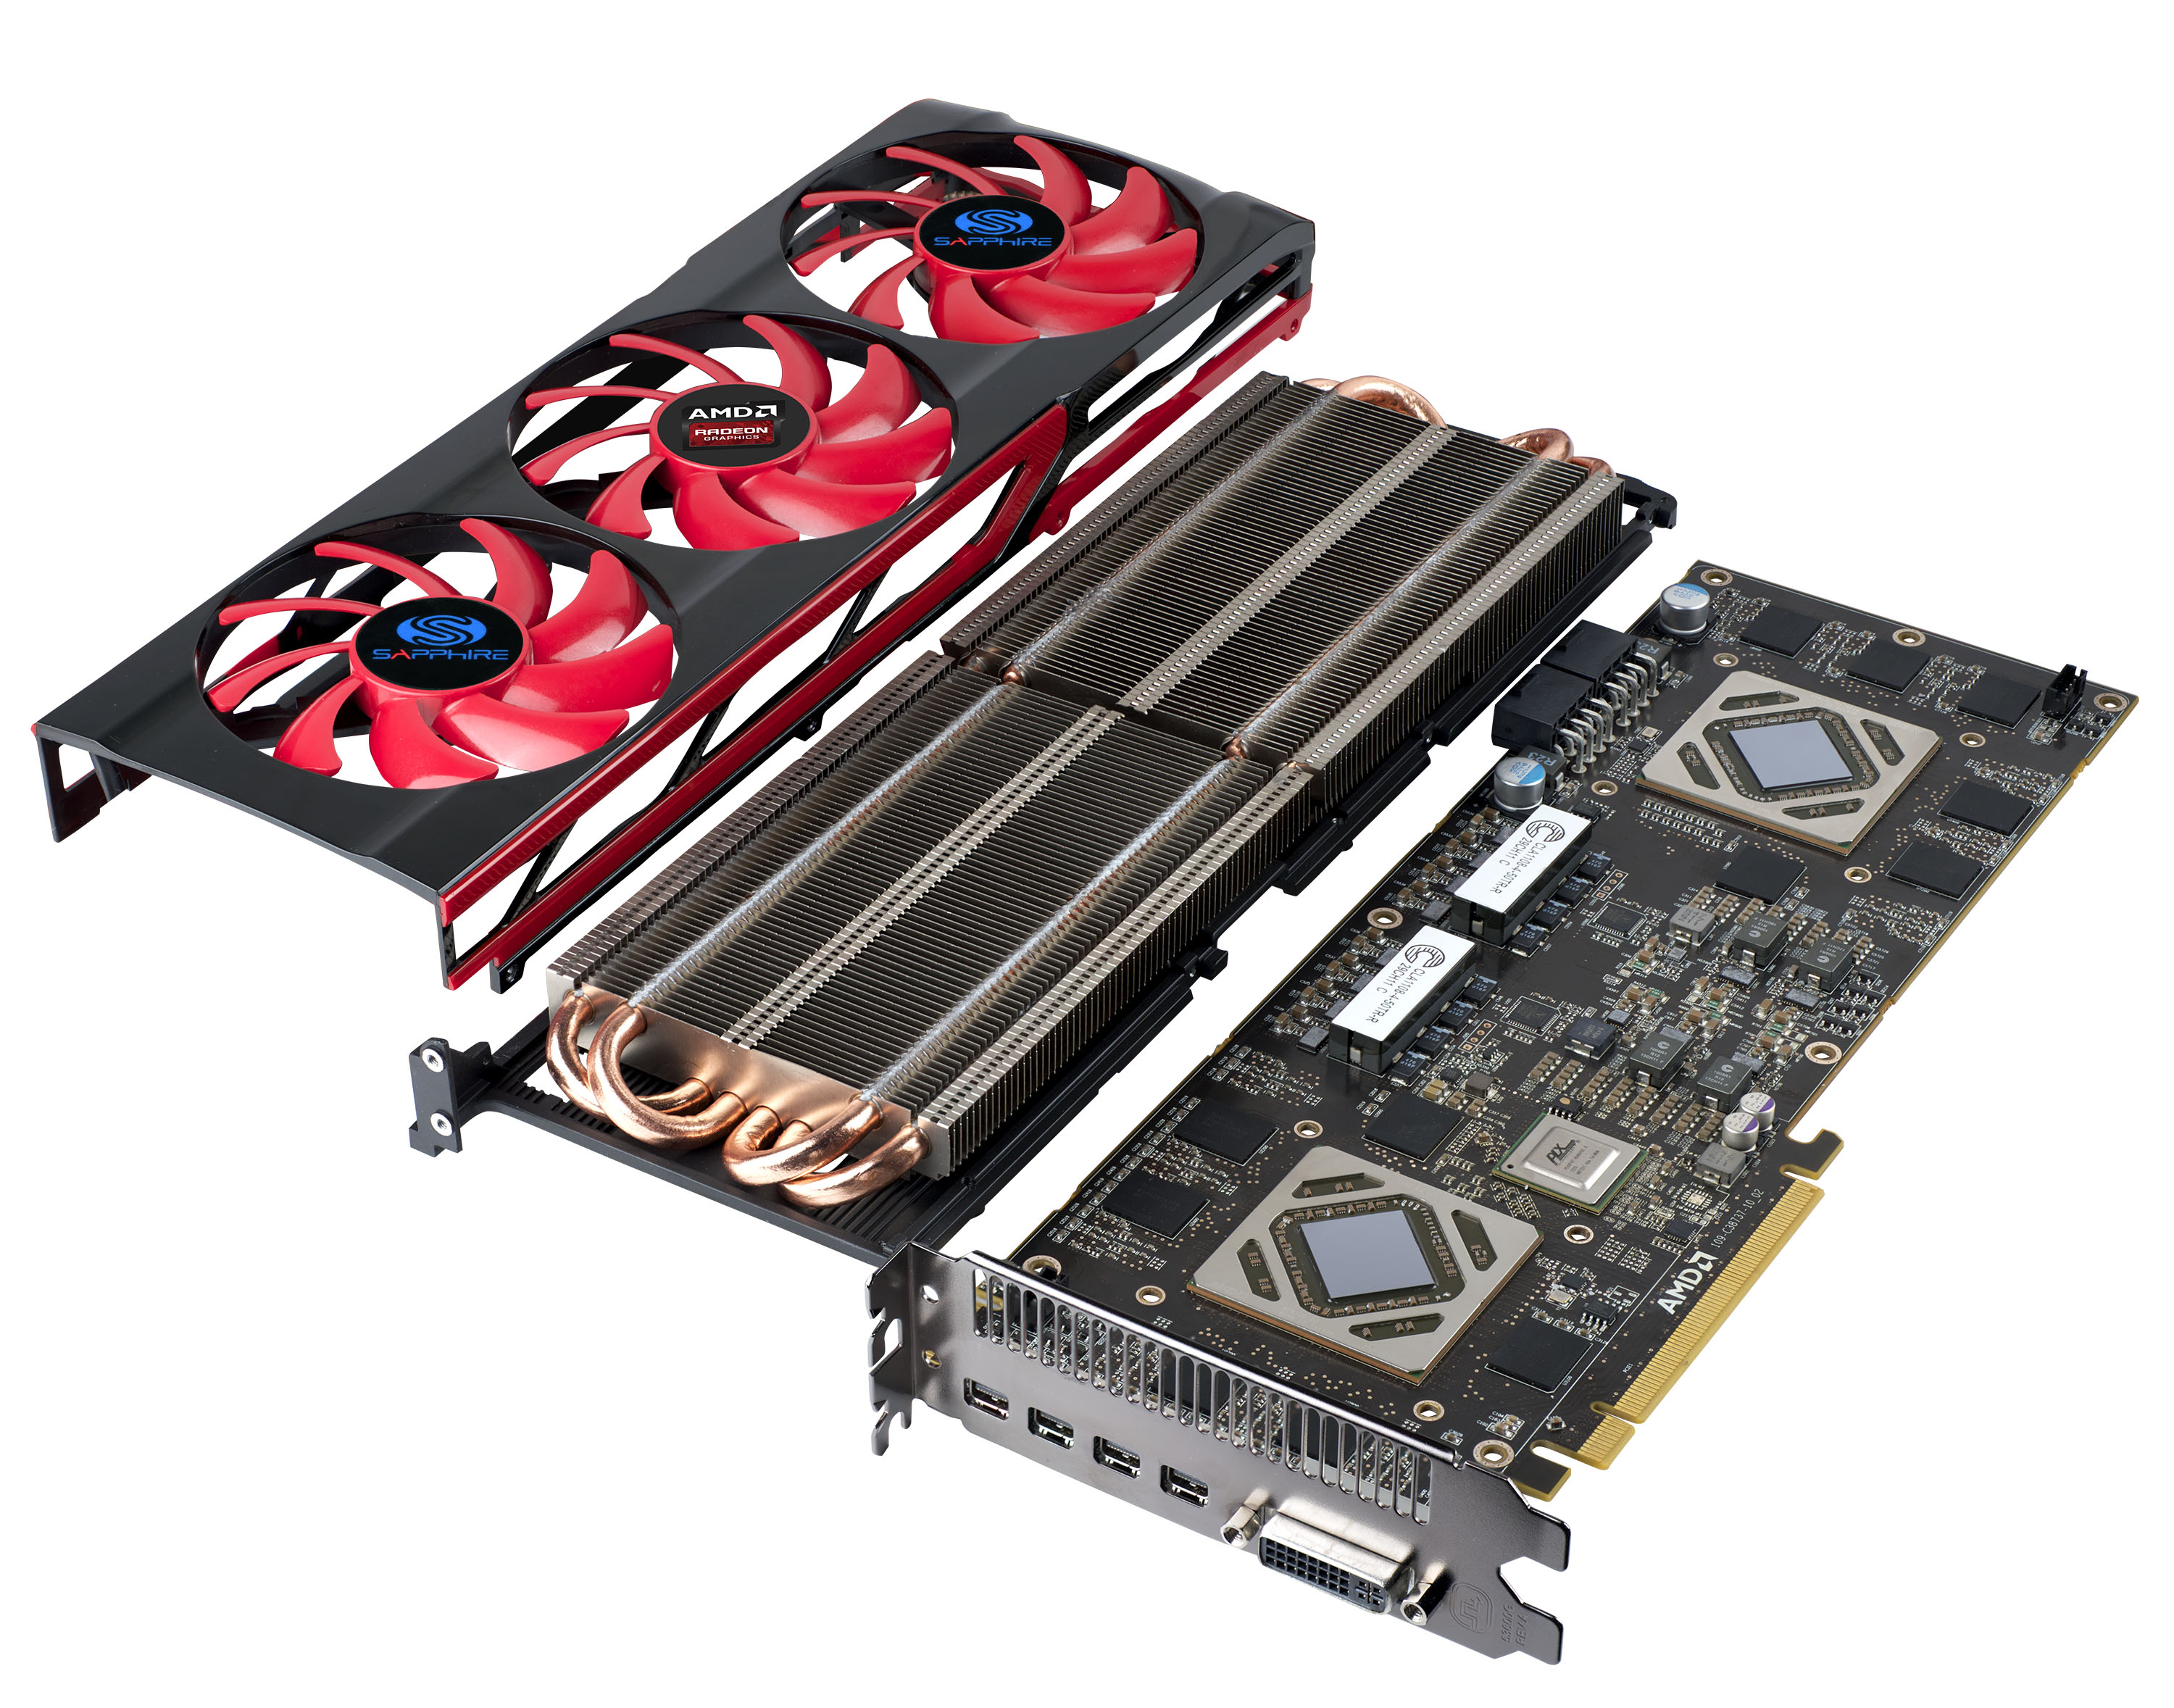 AMD and SAPPHIRE Releases The SAPPHIRE HD 7990 AMD, Sapphire, Video Card 3